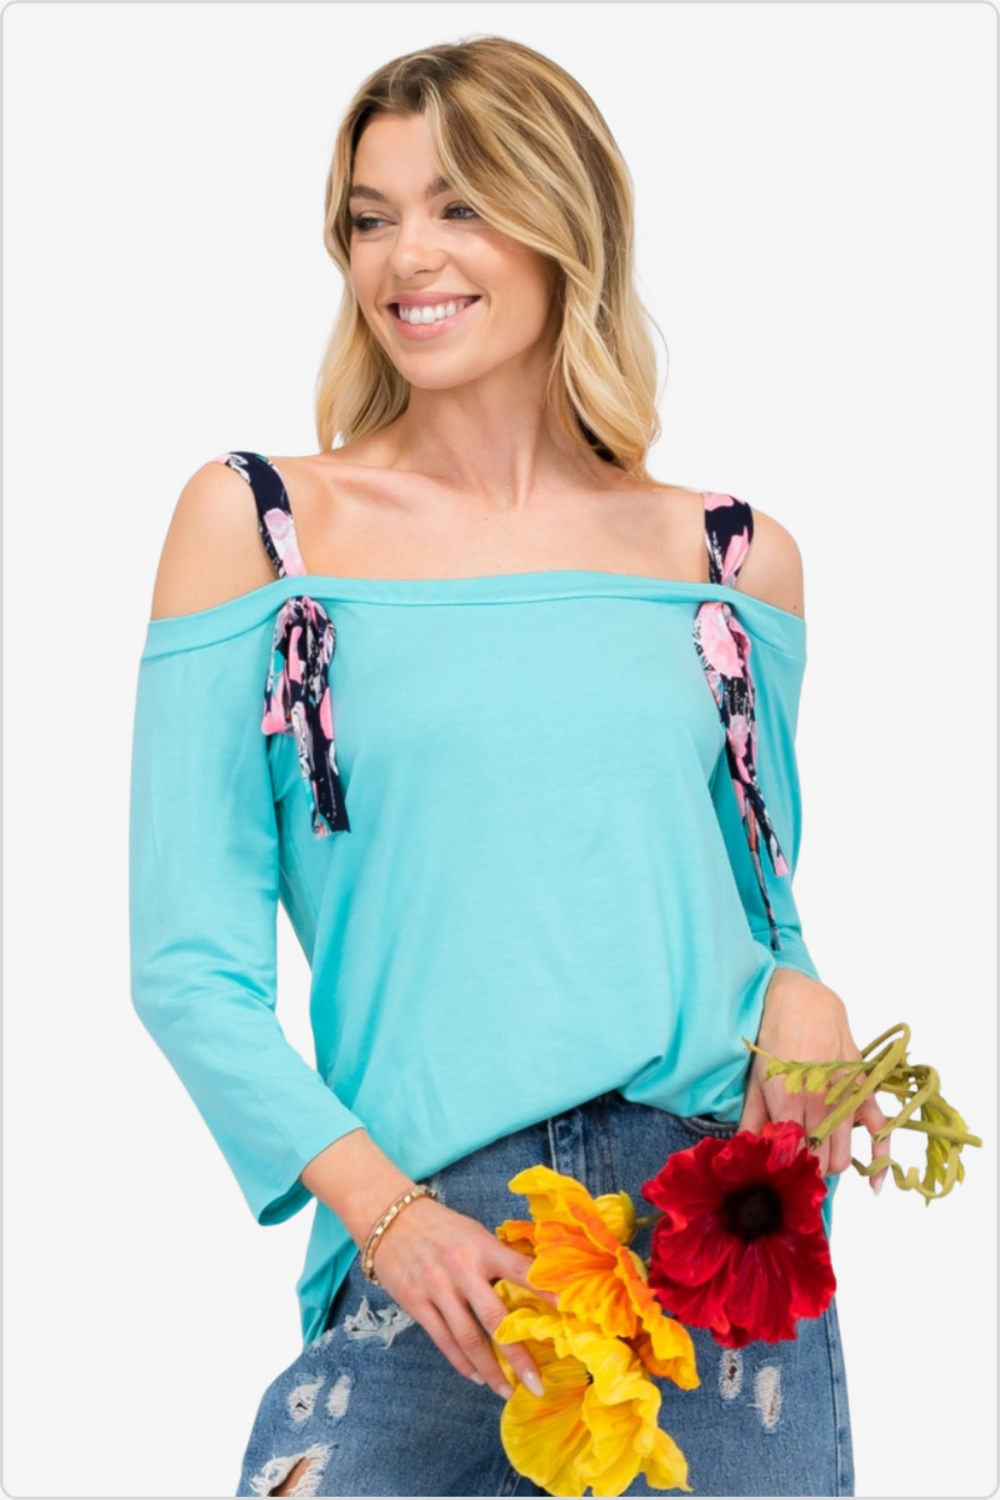 Radiant woman in aqua blue off-shoulder top with floral straps, fresh and summery style.